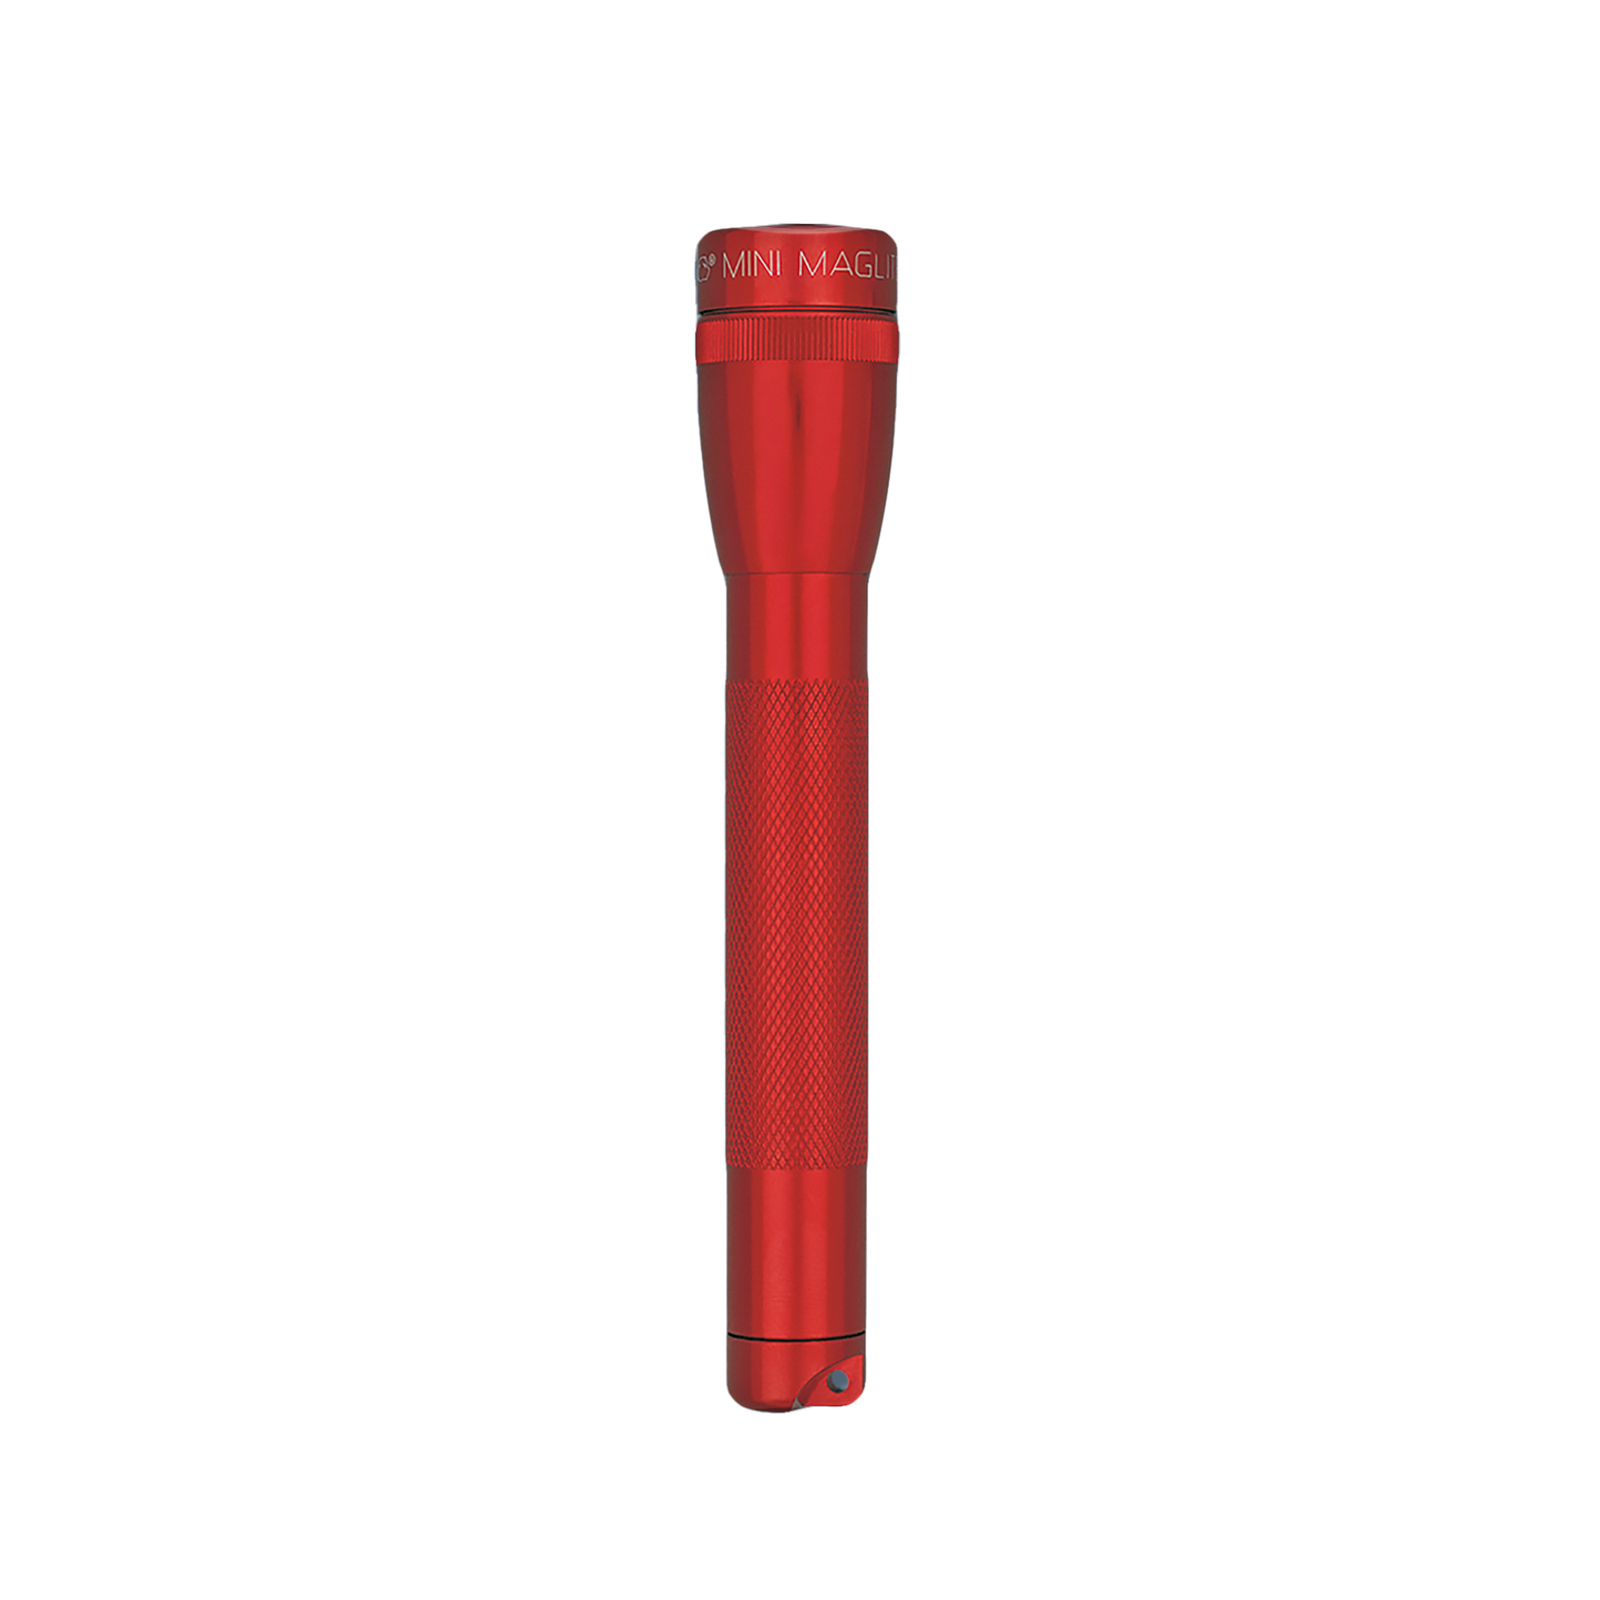 Maglite Xenon-lommelykt Mini, 2-Cell AA, Combo Pack, rød